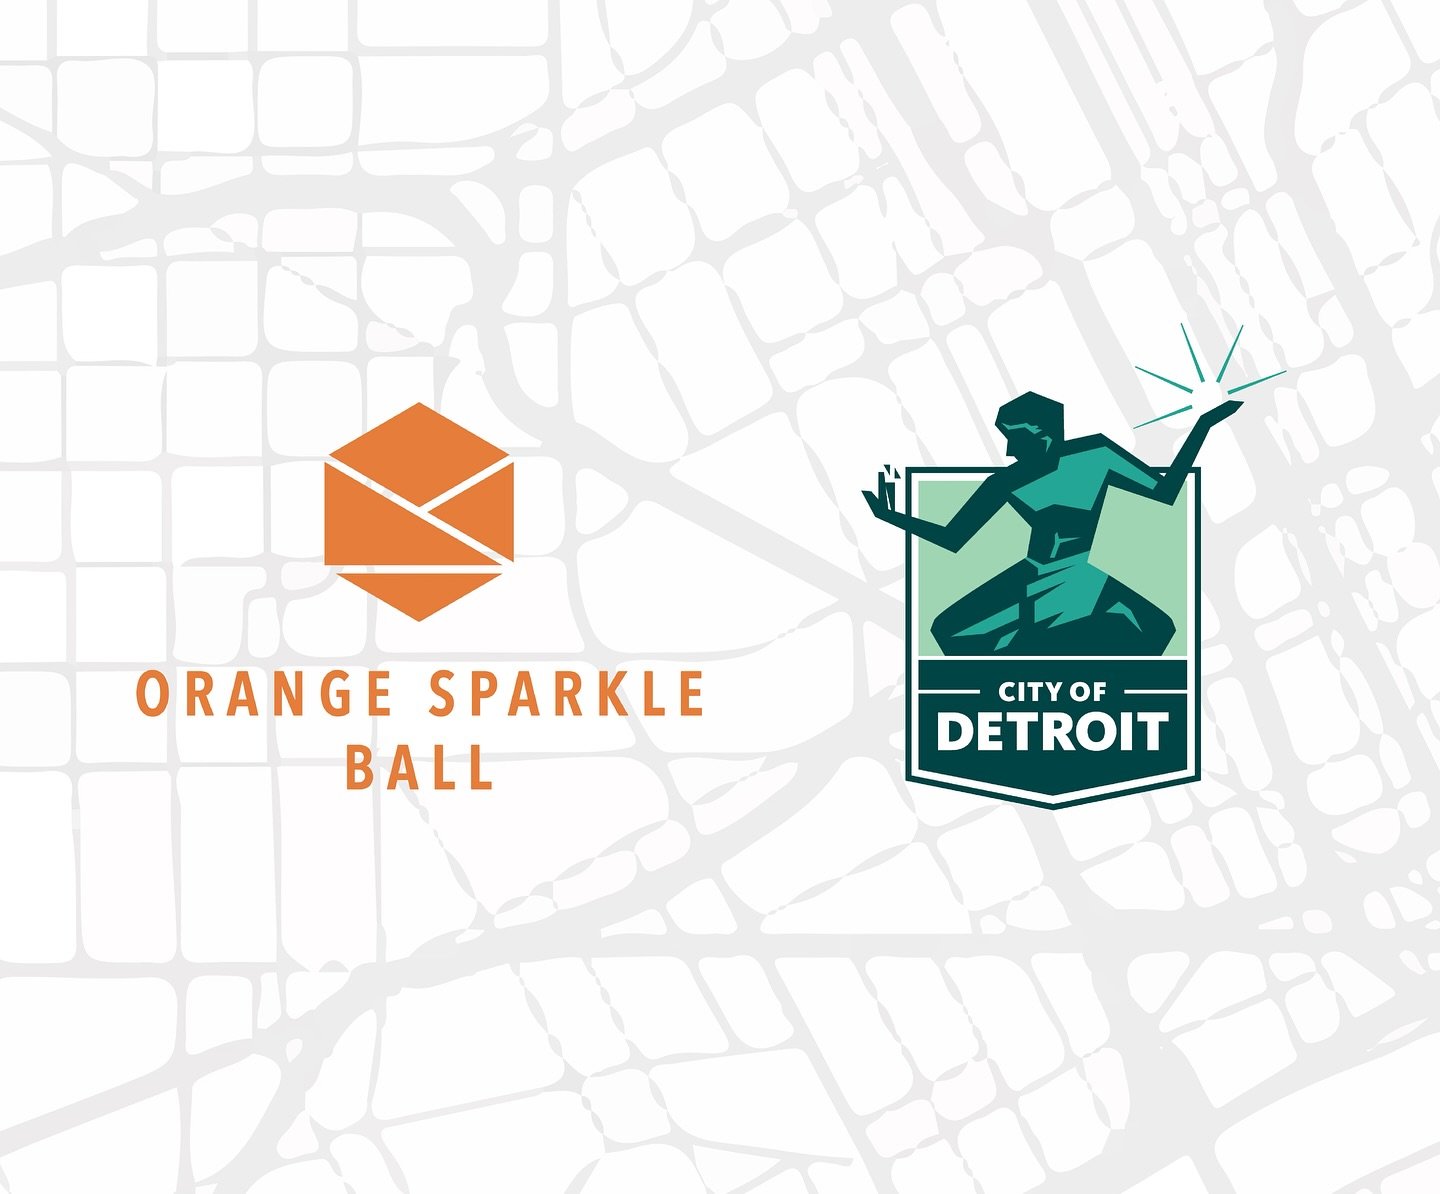 Orange Sparkle Ball, Inc. has been awarded a Real World Deployment Grant from the Michigan Economic Development Corporation&rsquo;s Office of Future Mobility and Electrification! This grant is enabling us to put our Autonomous Robotic Pickup Platform